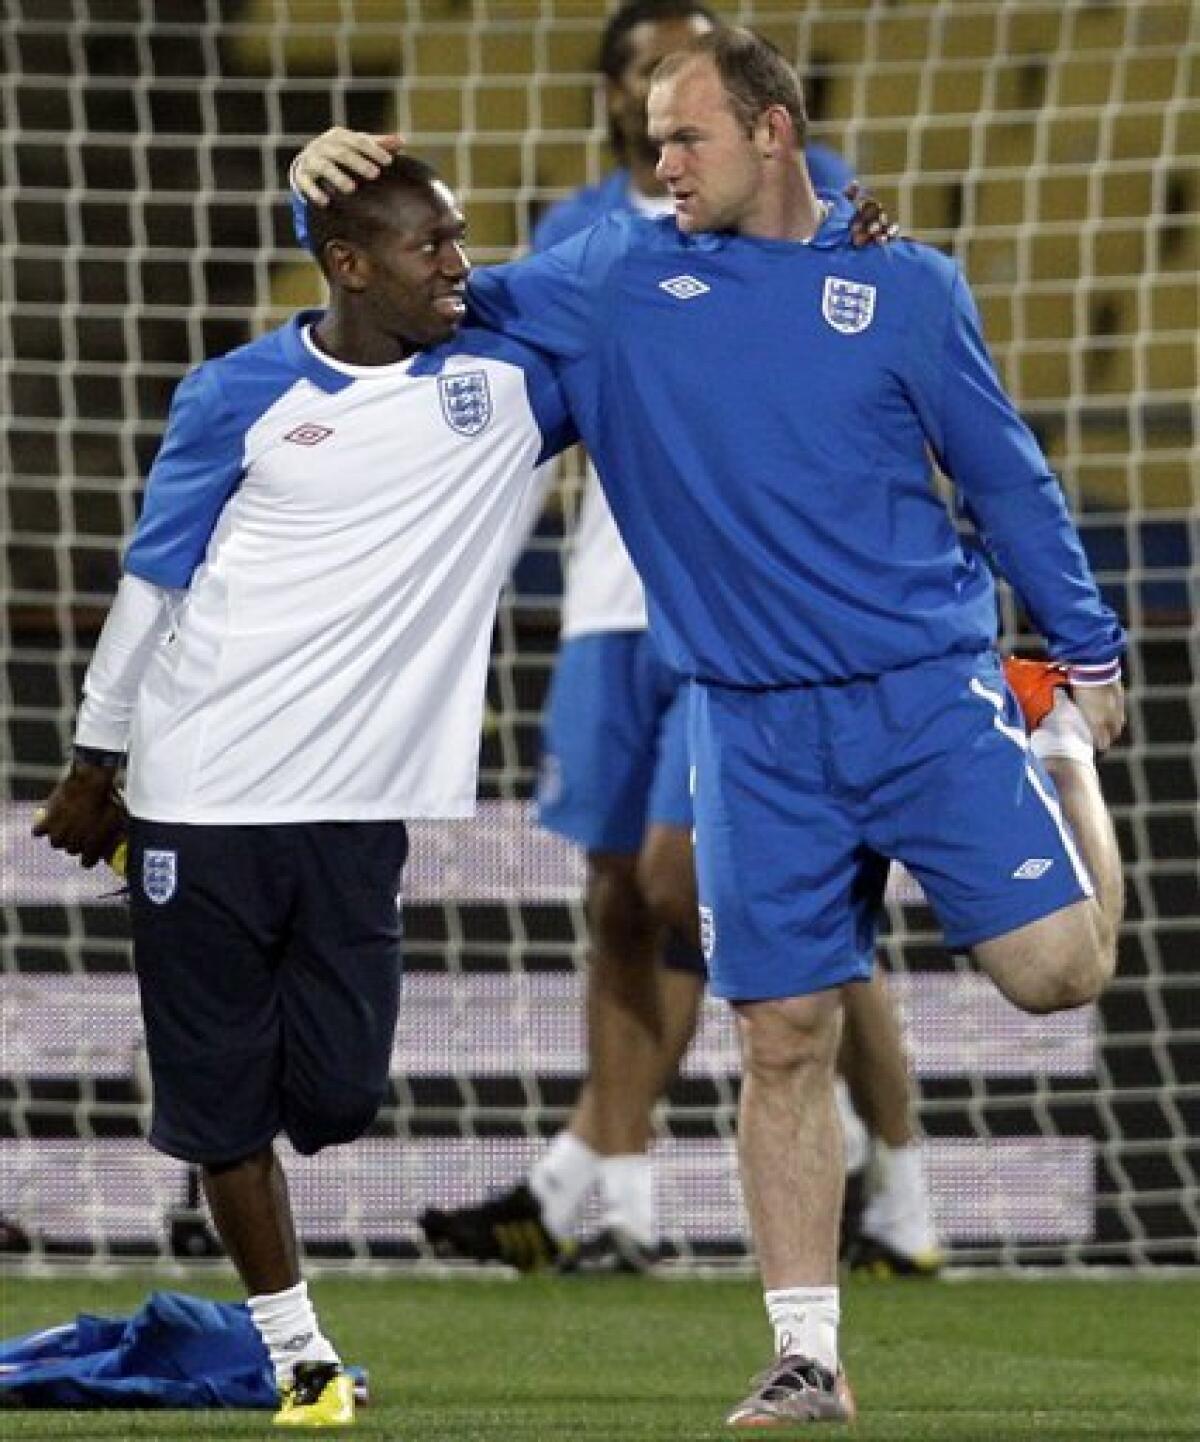 England soccer players Shaun Wright-Phillips, left, and Wayne Rooney stretch during training at the Royal Bafokeng Stadium in Rustenburg, South Africa Friday, June 11, 2010. England will play the U.S. in a soccer World Cup Group C match on Saturday. (AP Photo/Elise Amendola)